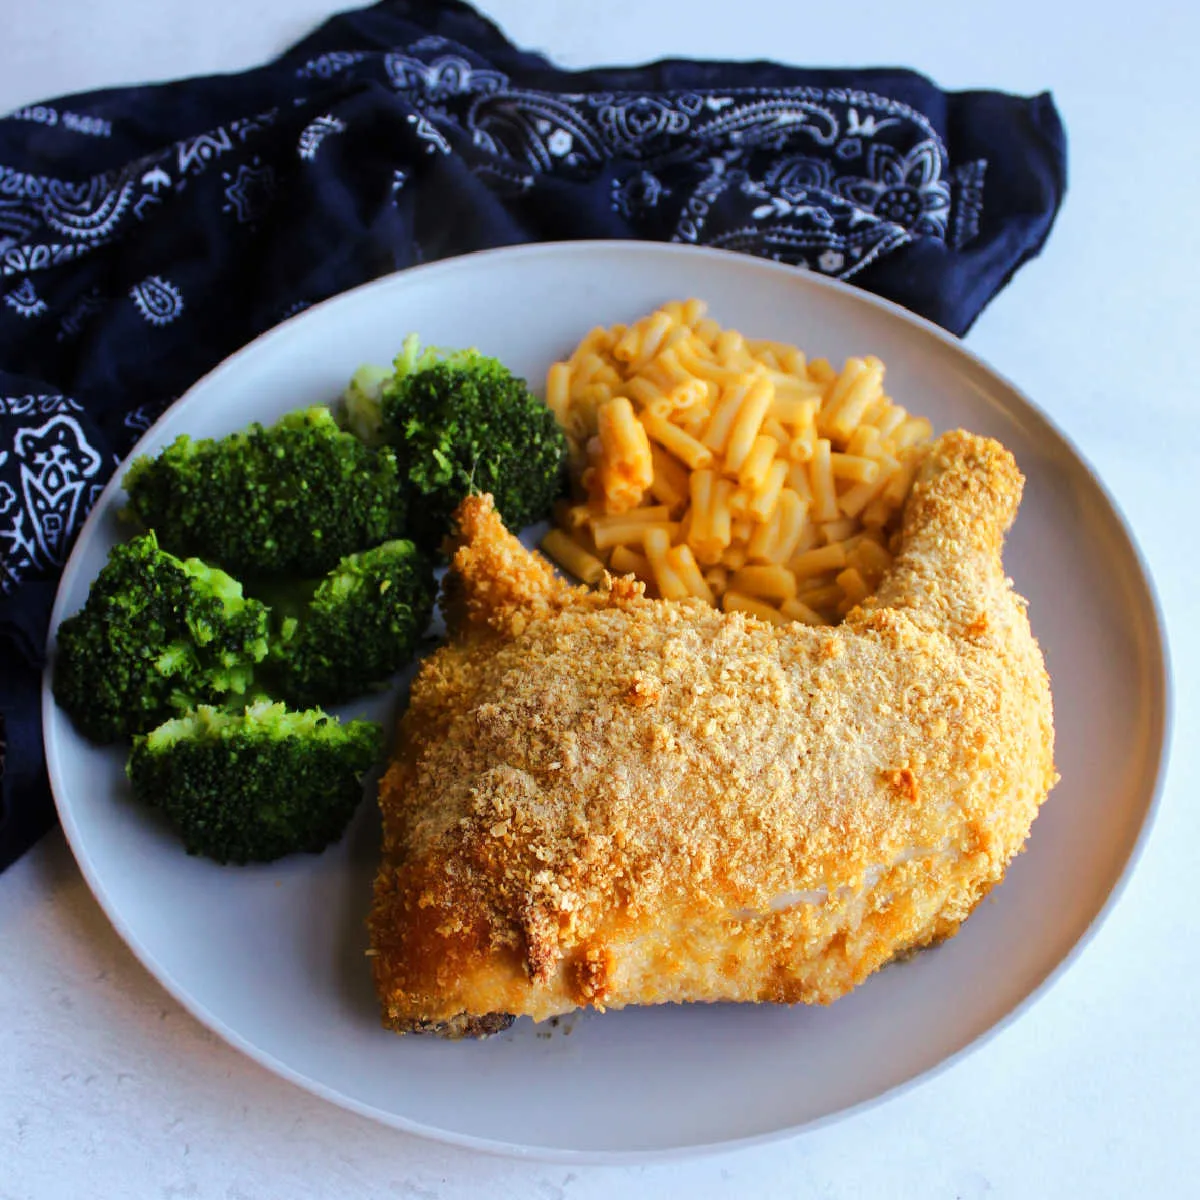 Dinner plate with cornflake crumb coated chicken leg quarter, mac and cheese and broccoli ready to eat.